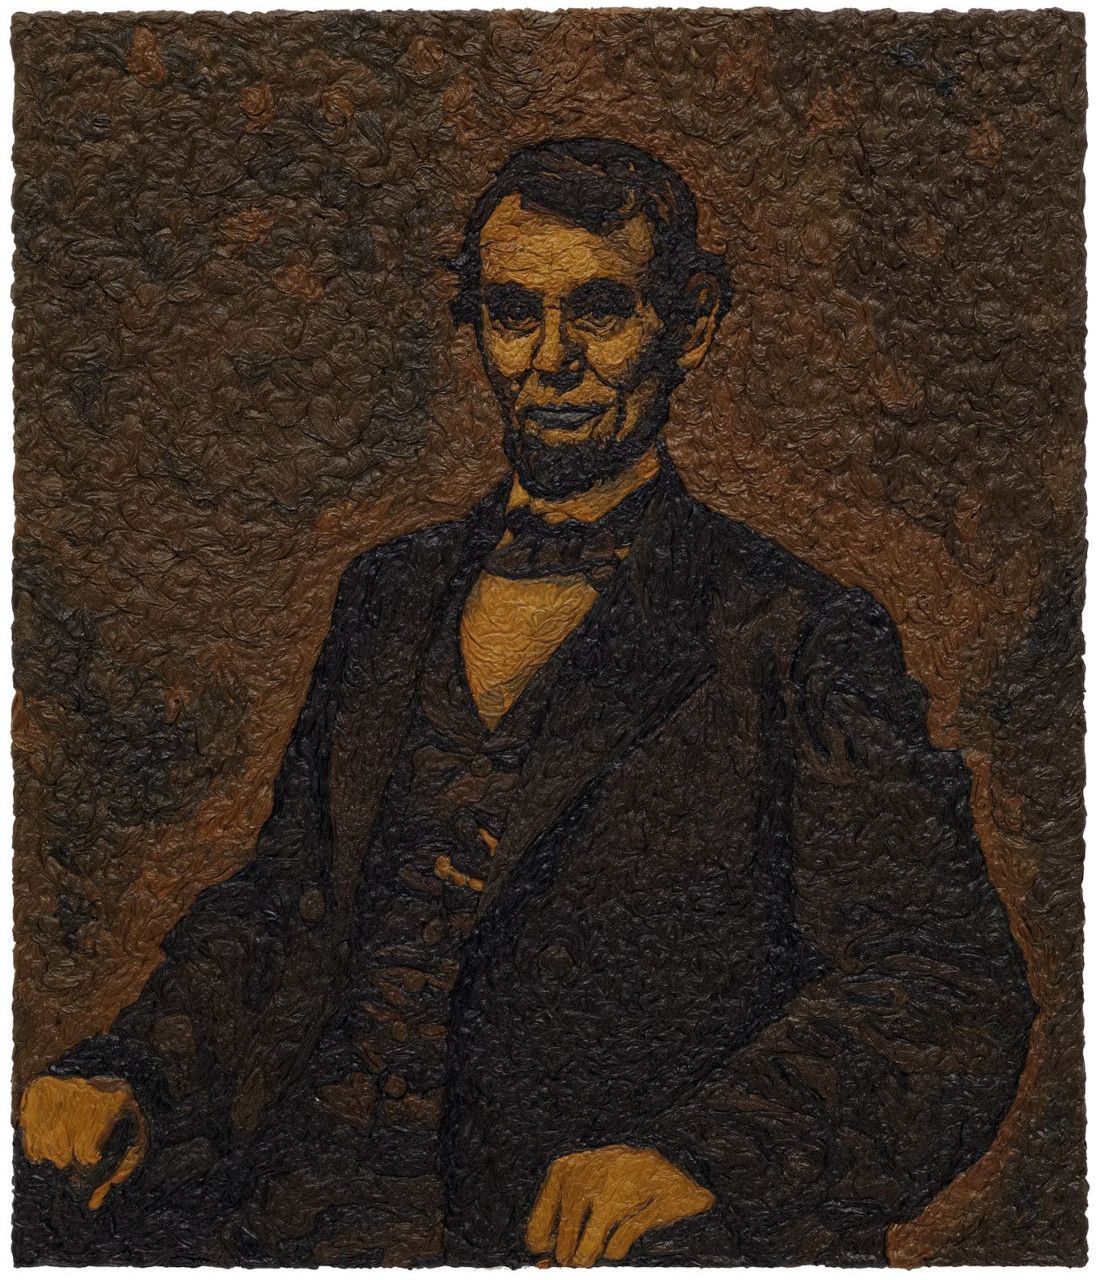 Reinvention of famous Abraham Lincoln image by Mark Alexander using thick dark oil paints.